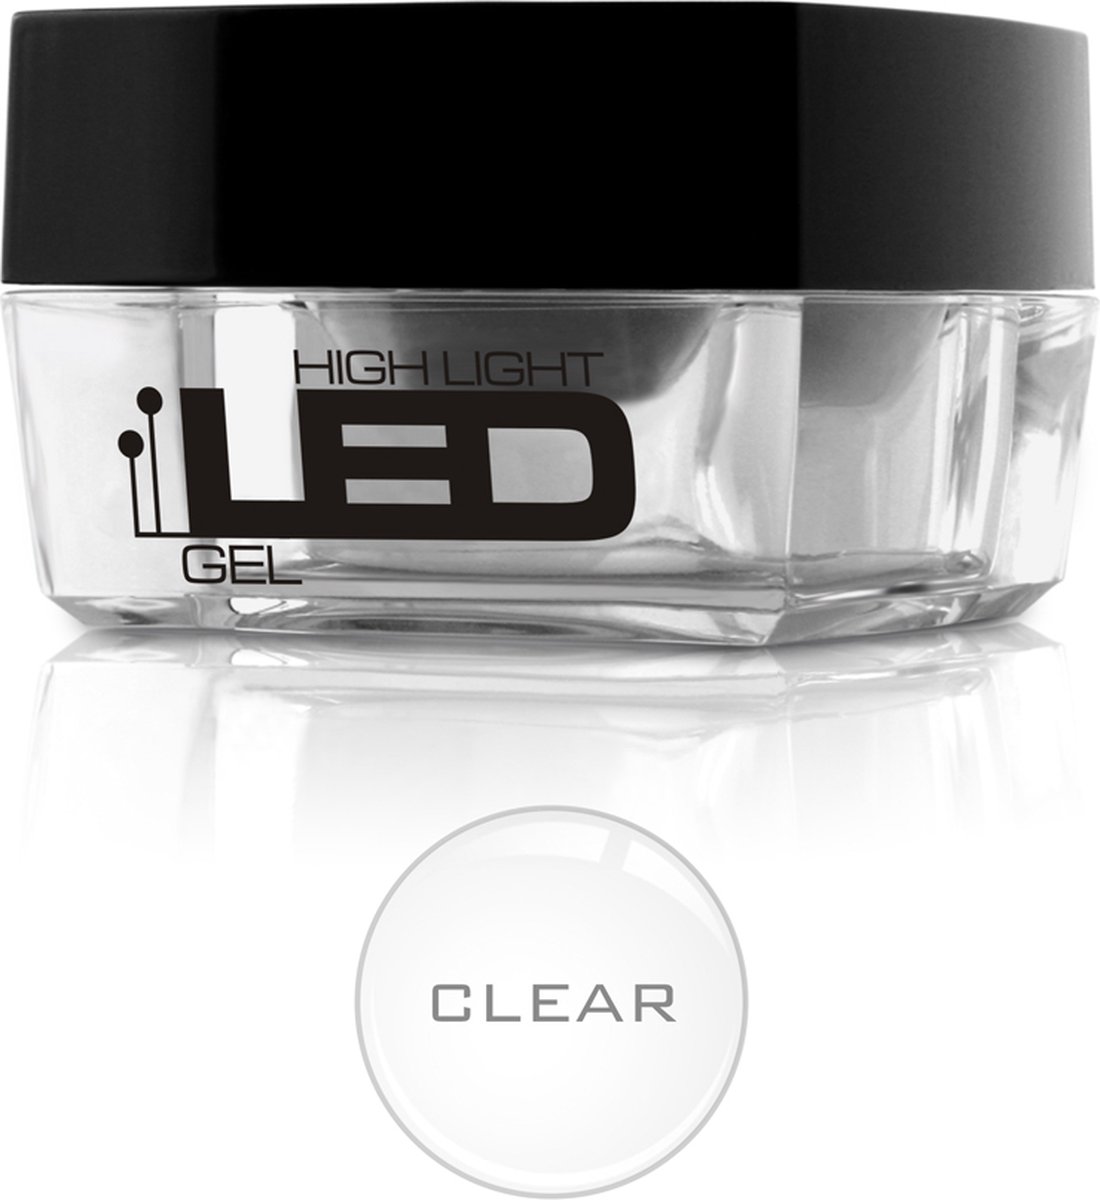 Silcare - High Light Led Gel Medium-Knelt Uniphase Gel To The Chitchokci Clear 30G